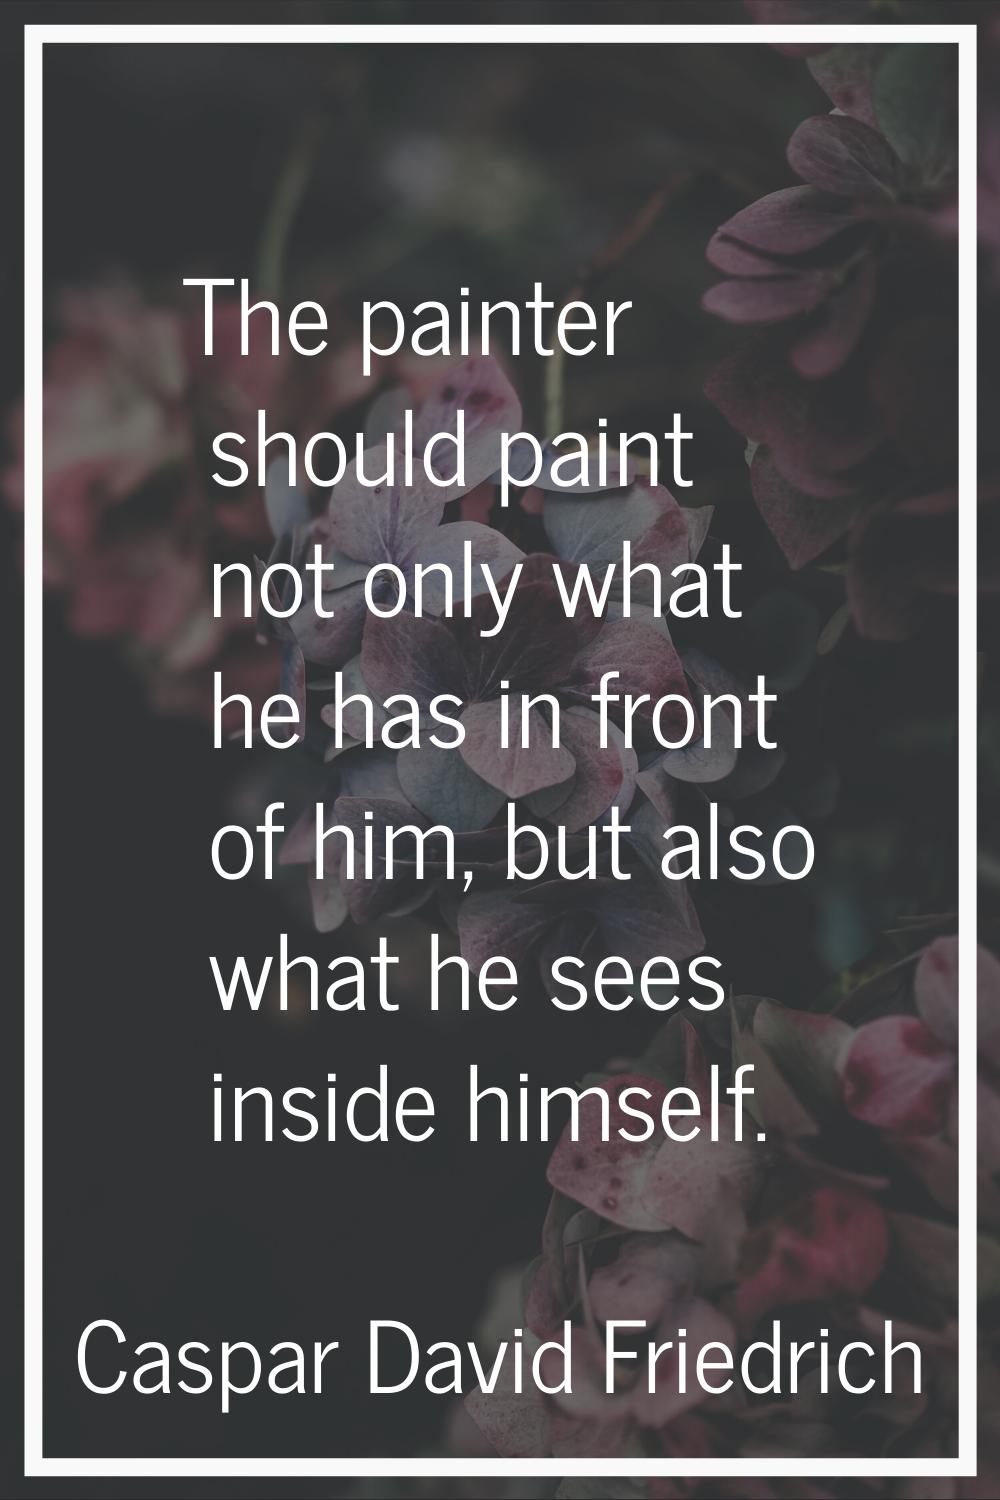 The painter should paint not only what he has in front of him, but also what he sees inside himself